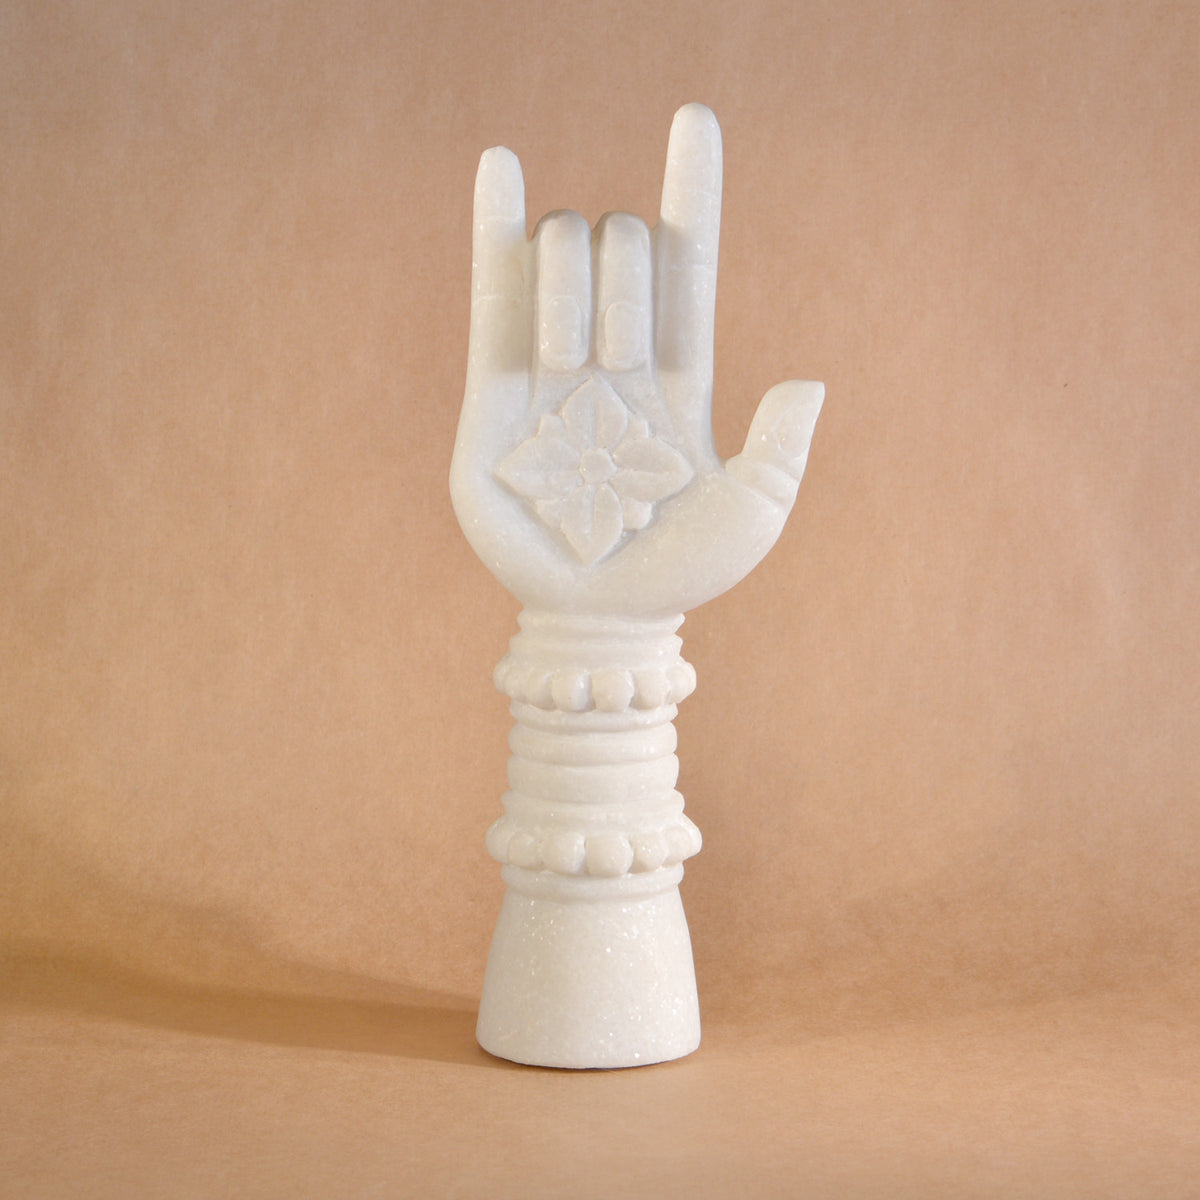 Buddha Hand carved from White Marble image 4 of 7